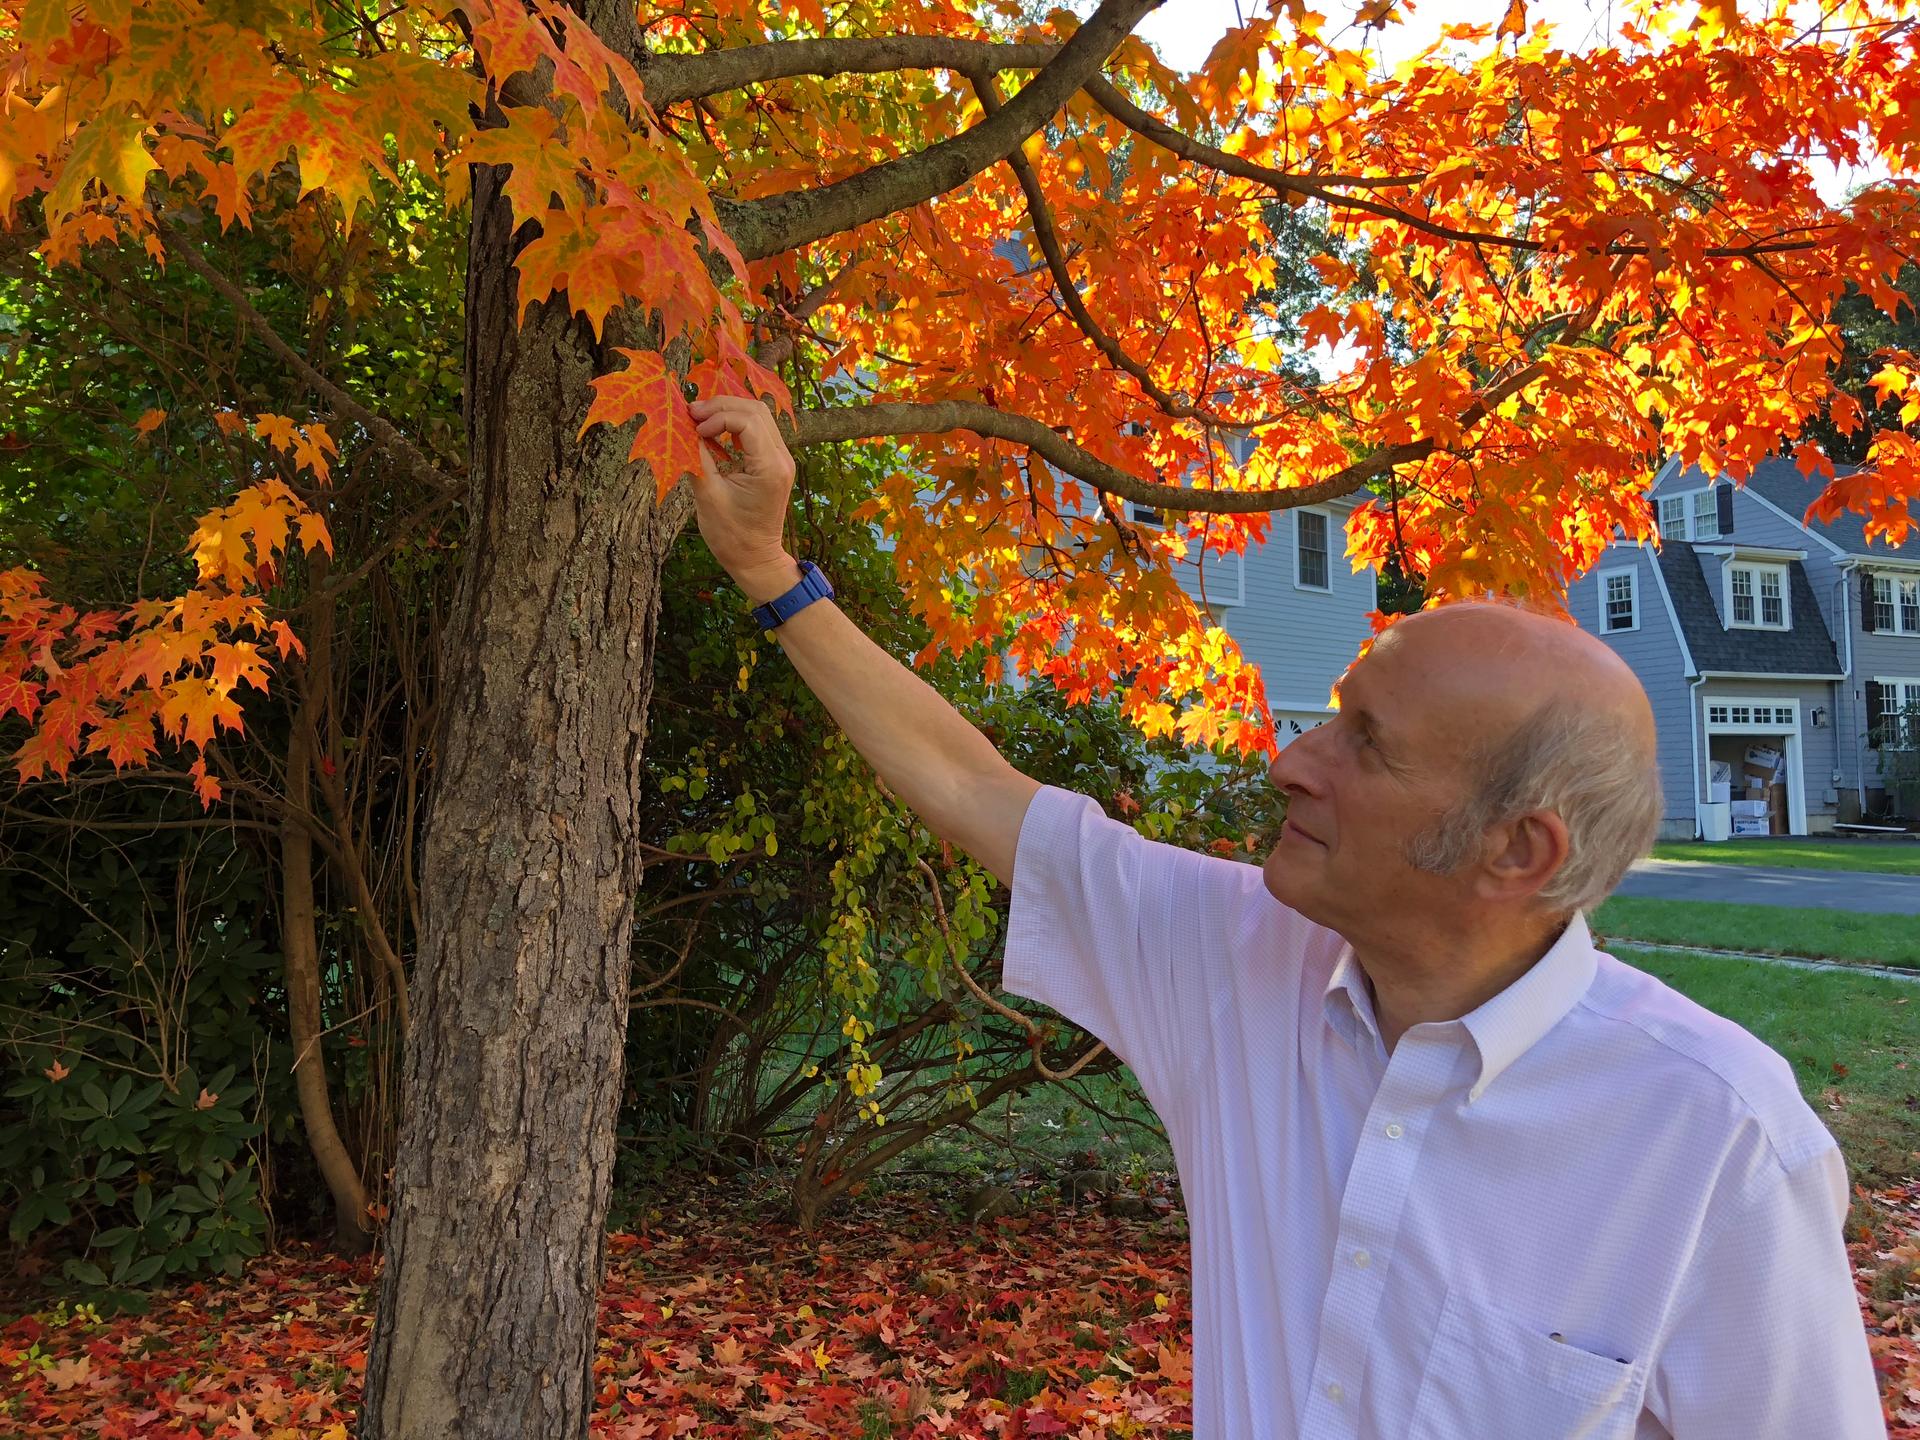 Biologist Richard Primack with Boston University examines the leaves of a Norway maple in the Boston suburb, Newton, Massachusetts.